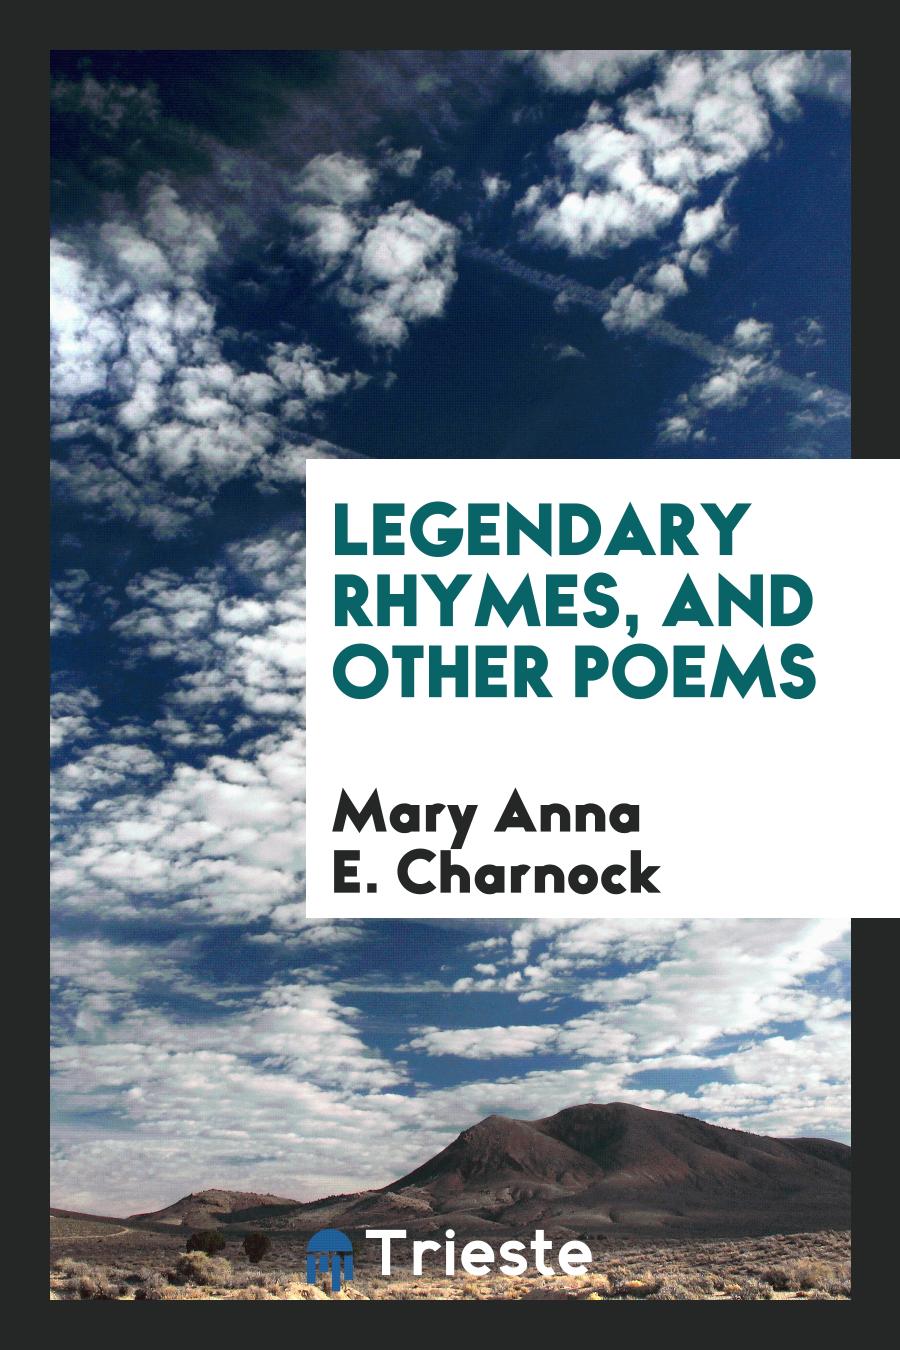 Legendary rhymes, and other poems